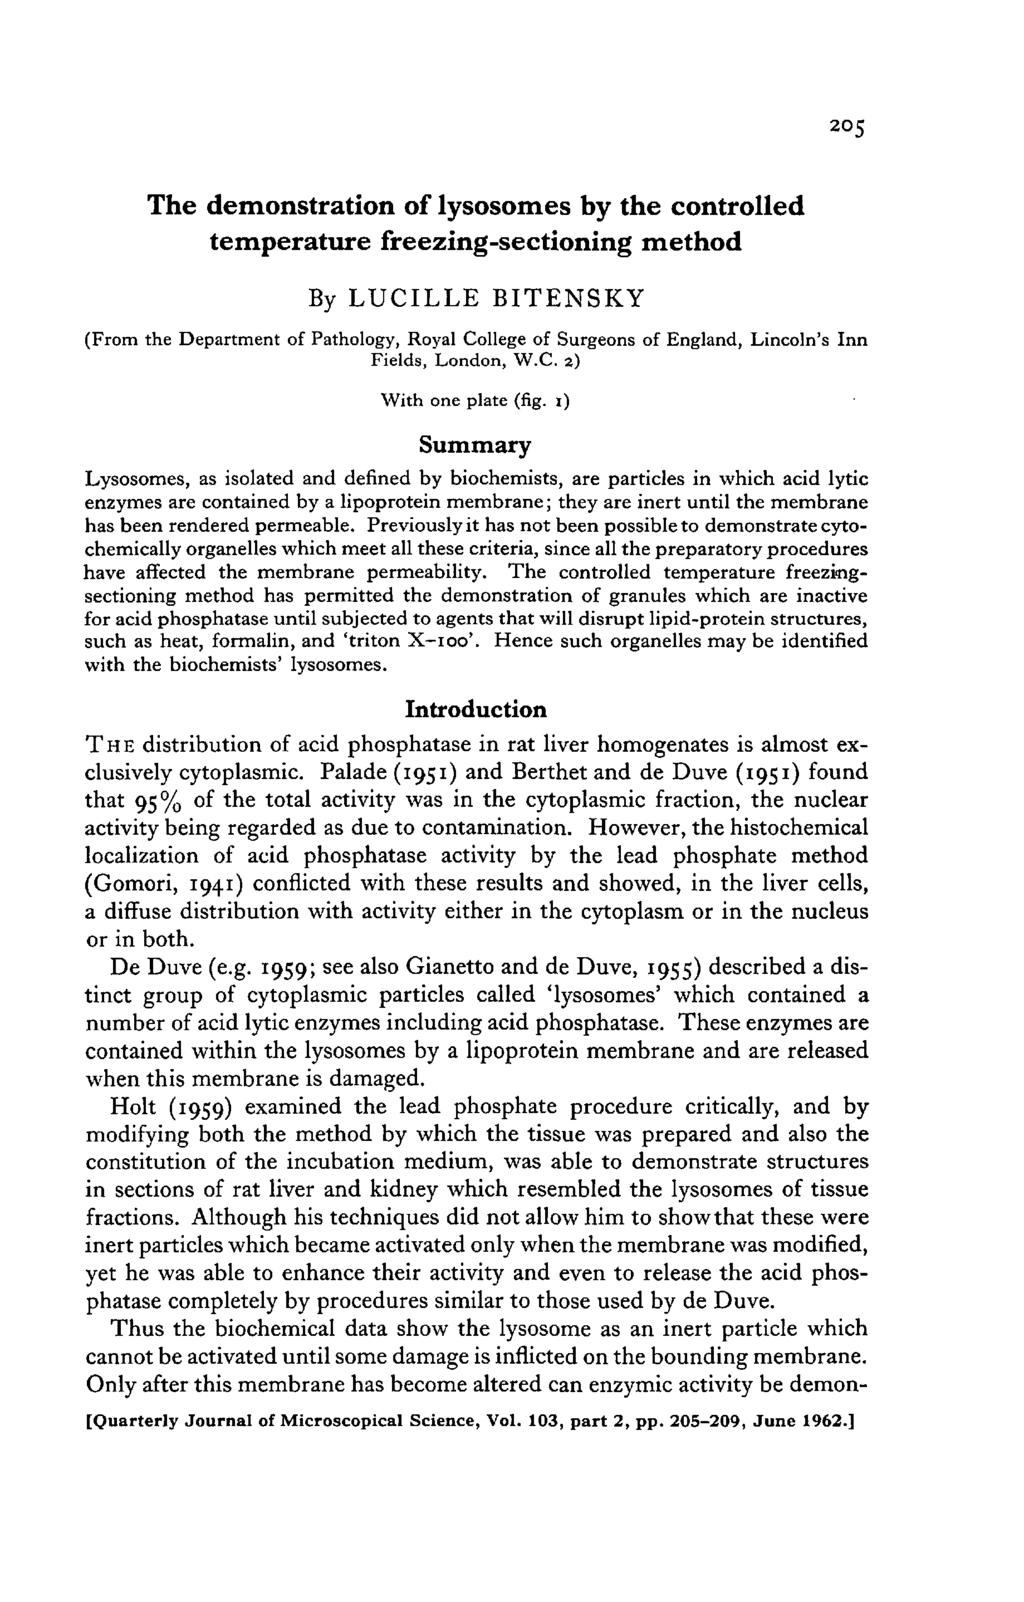 205 The demnstratin f lyssmes by the cntrlled temperature freezing-sectining methd By LUCILLE BITESKY (Frm the Department f Pathlgy, Ryal Cllege f Surgens f England, Lincln's Inn Fields, Lndn, W.C. 2) With ne plate (fig.